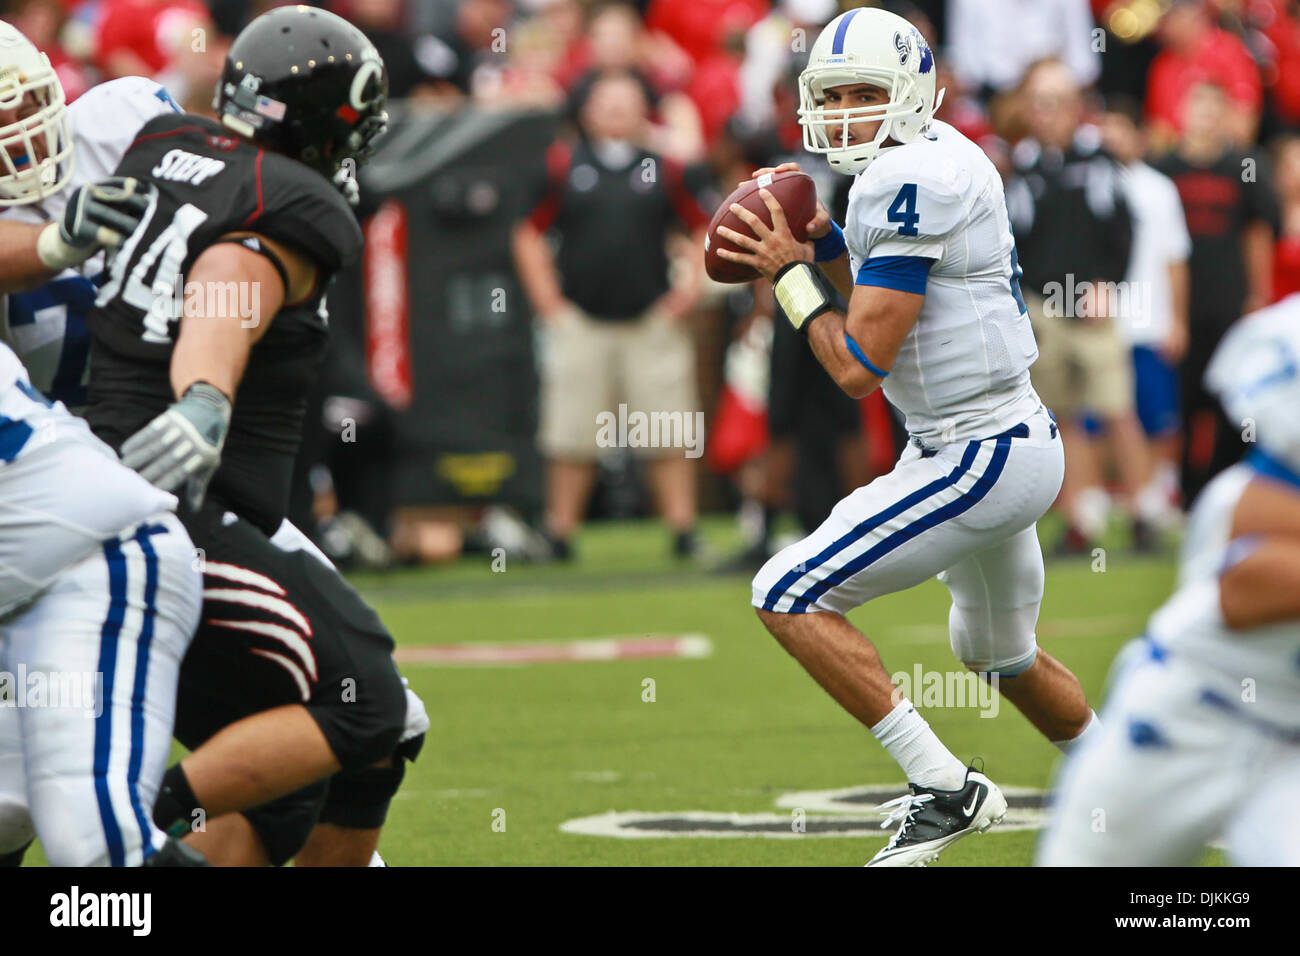 Sept. 11, 2010 - Cincinnati, Ohio, United States of America - Indiana State Sycamores quarterback Ronnie Fouch (4) during the second half of the game between the University of Cincinnati and Indiana State at Nippert Stadium, Cincinnati, Ohio. Cincinnati won with a final score of 40-7. (Credit Image: © John Longo/Southcreek Global/ZUMApress.com) Stock Photo